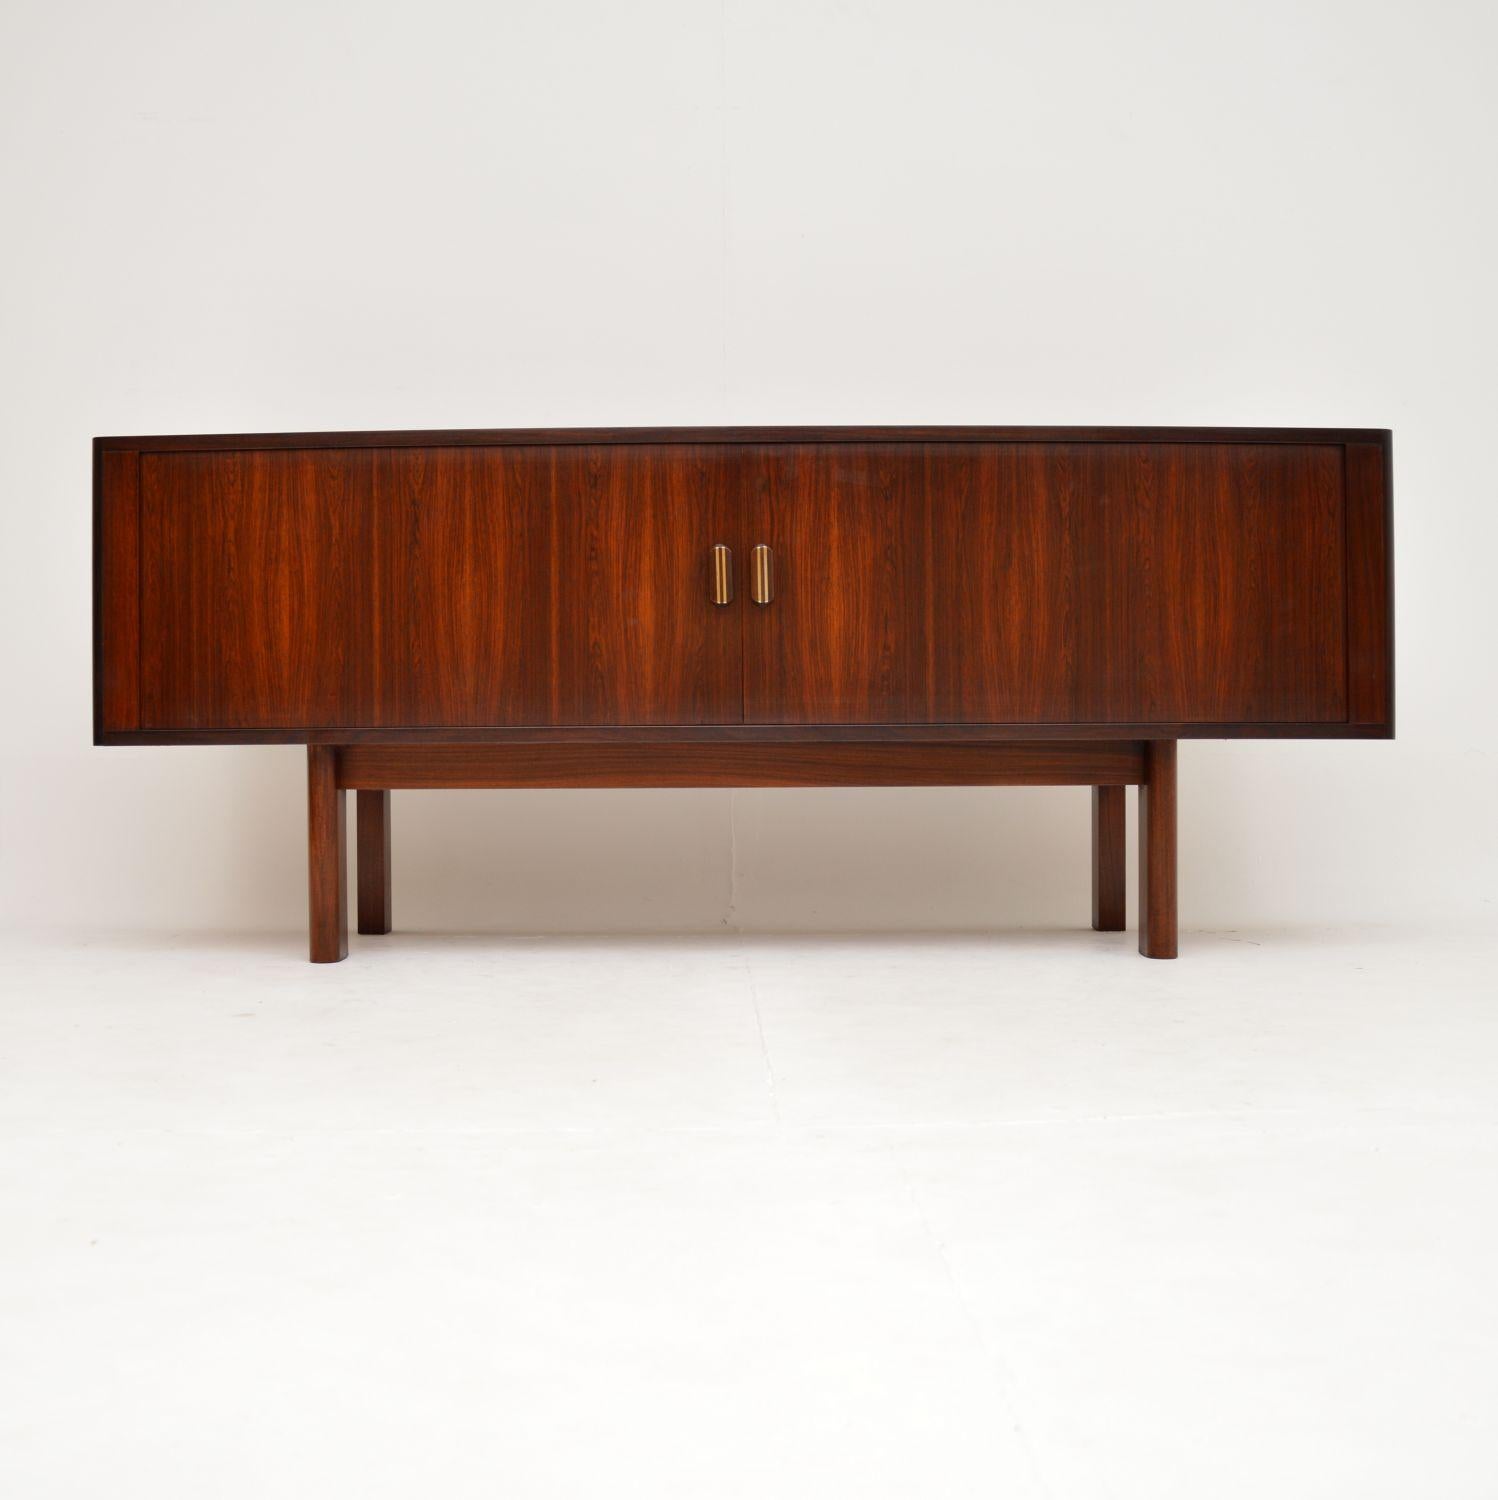 A magnificent vintage Danish tambour front sideboard. This was designed by Arne Vodder and was made by Sibast around the 1960’s.

This is of absolutely amazing quality, with stunning wood grain patterns throughout. The tambour doors roll back to